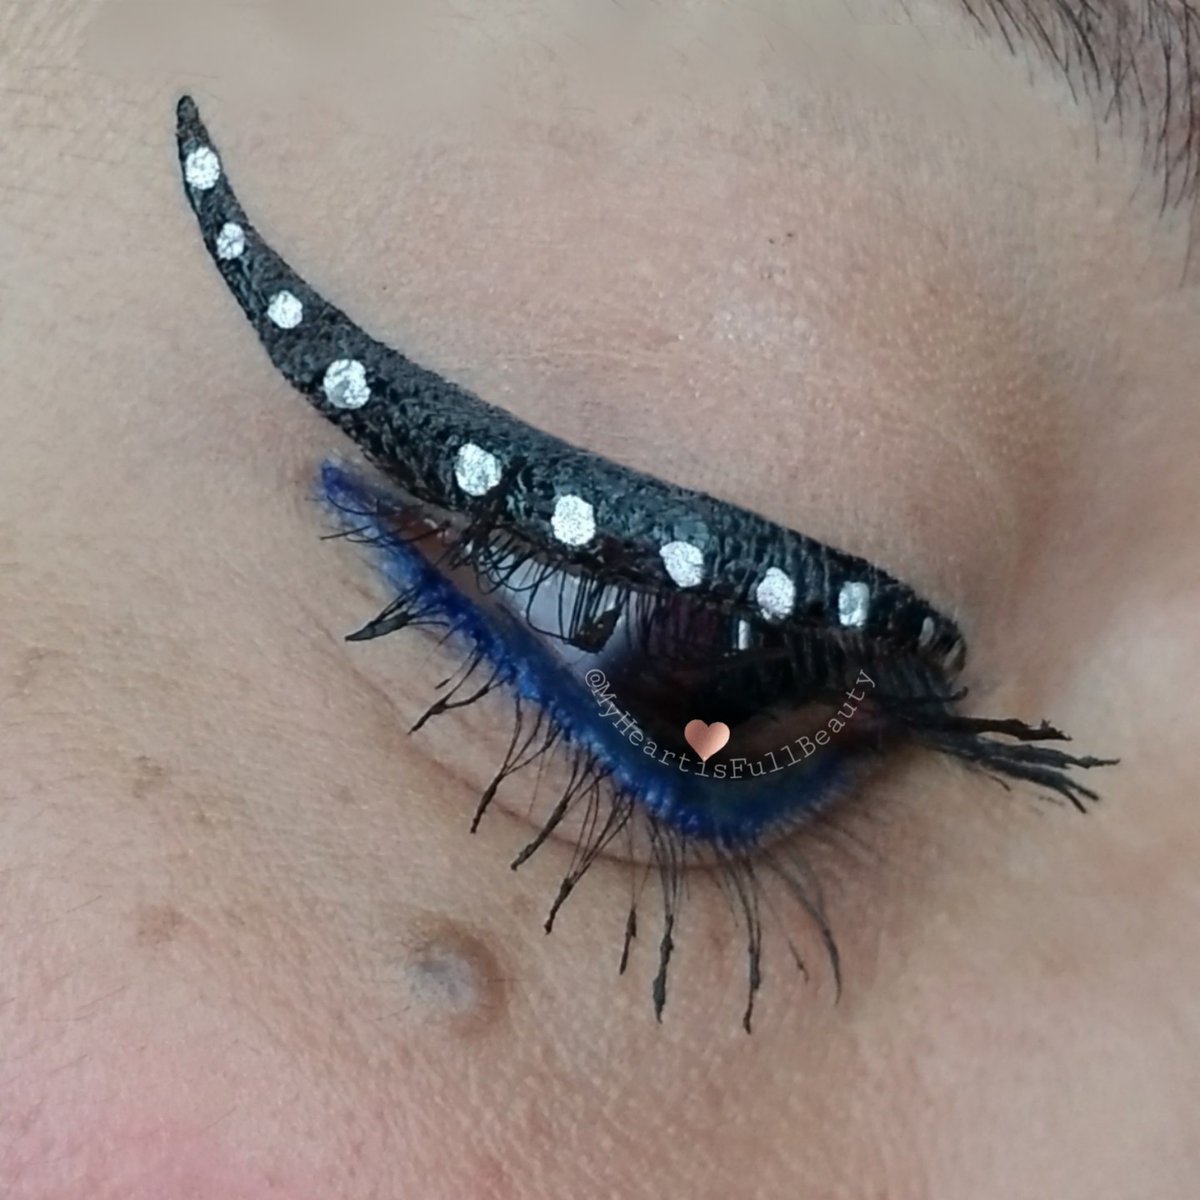 Gosh, I just #𝐋𝐎𝐕𝐄 creating #art, even as #simple as this is!!! And the #makeup that I use...? 𝐒𝐎 𝐒𝐈𝐌𝐏𝐋𝐄 to #create it all with!!! 😍⁣
⁣
If you could choose 𝐀𝐍𝐘 of your #hobbies to #build a business with, what would it be...? 😊

#eyeliner #eyelinerart #makeupart